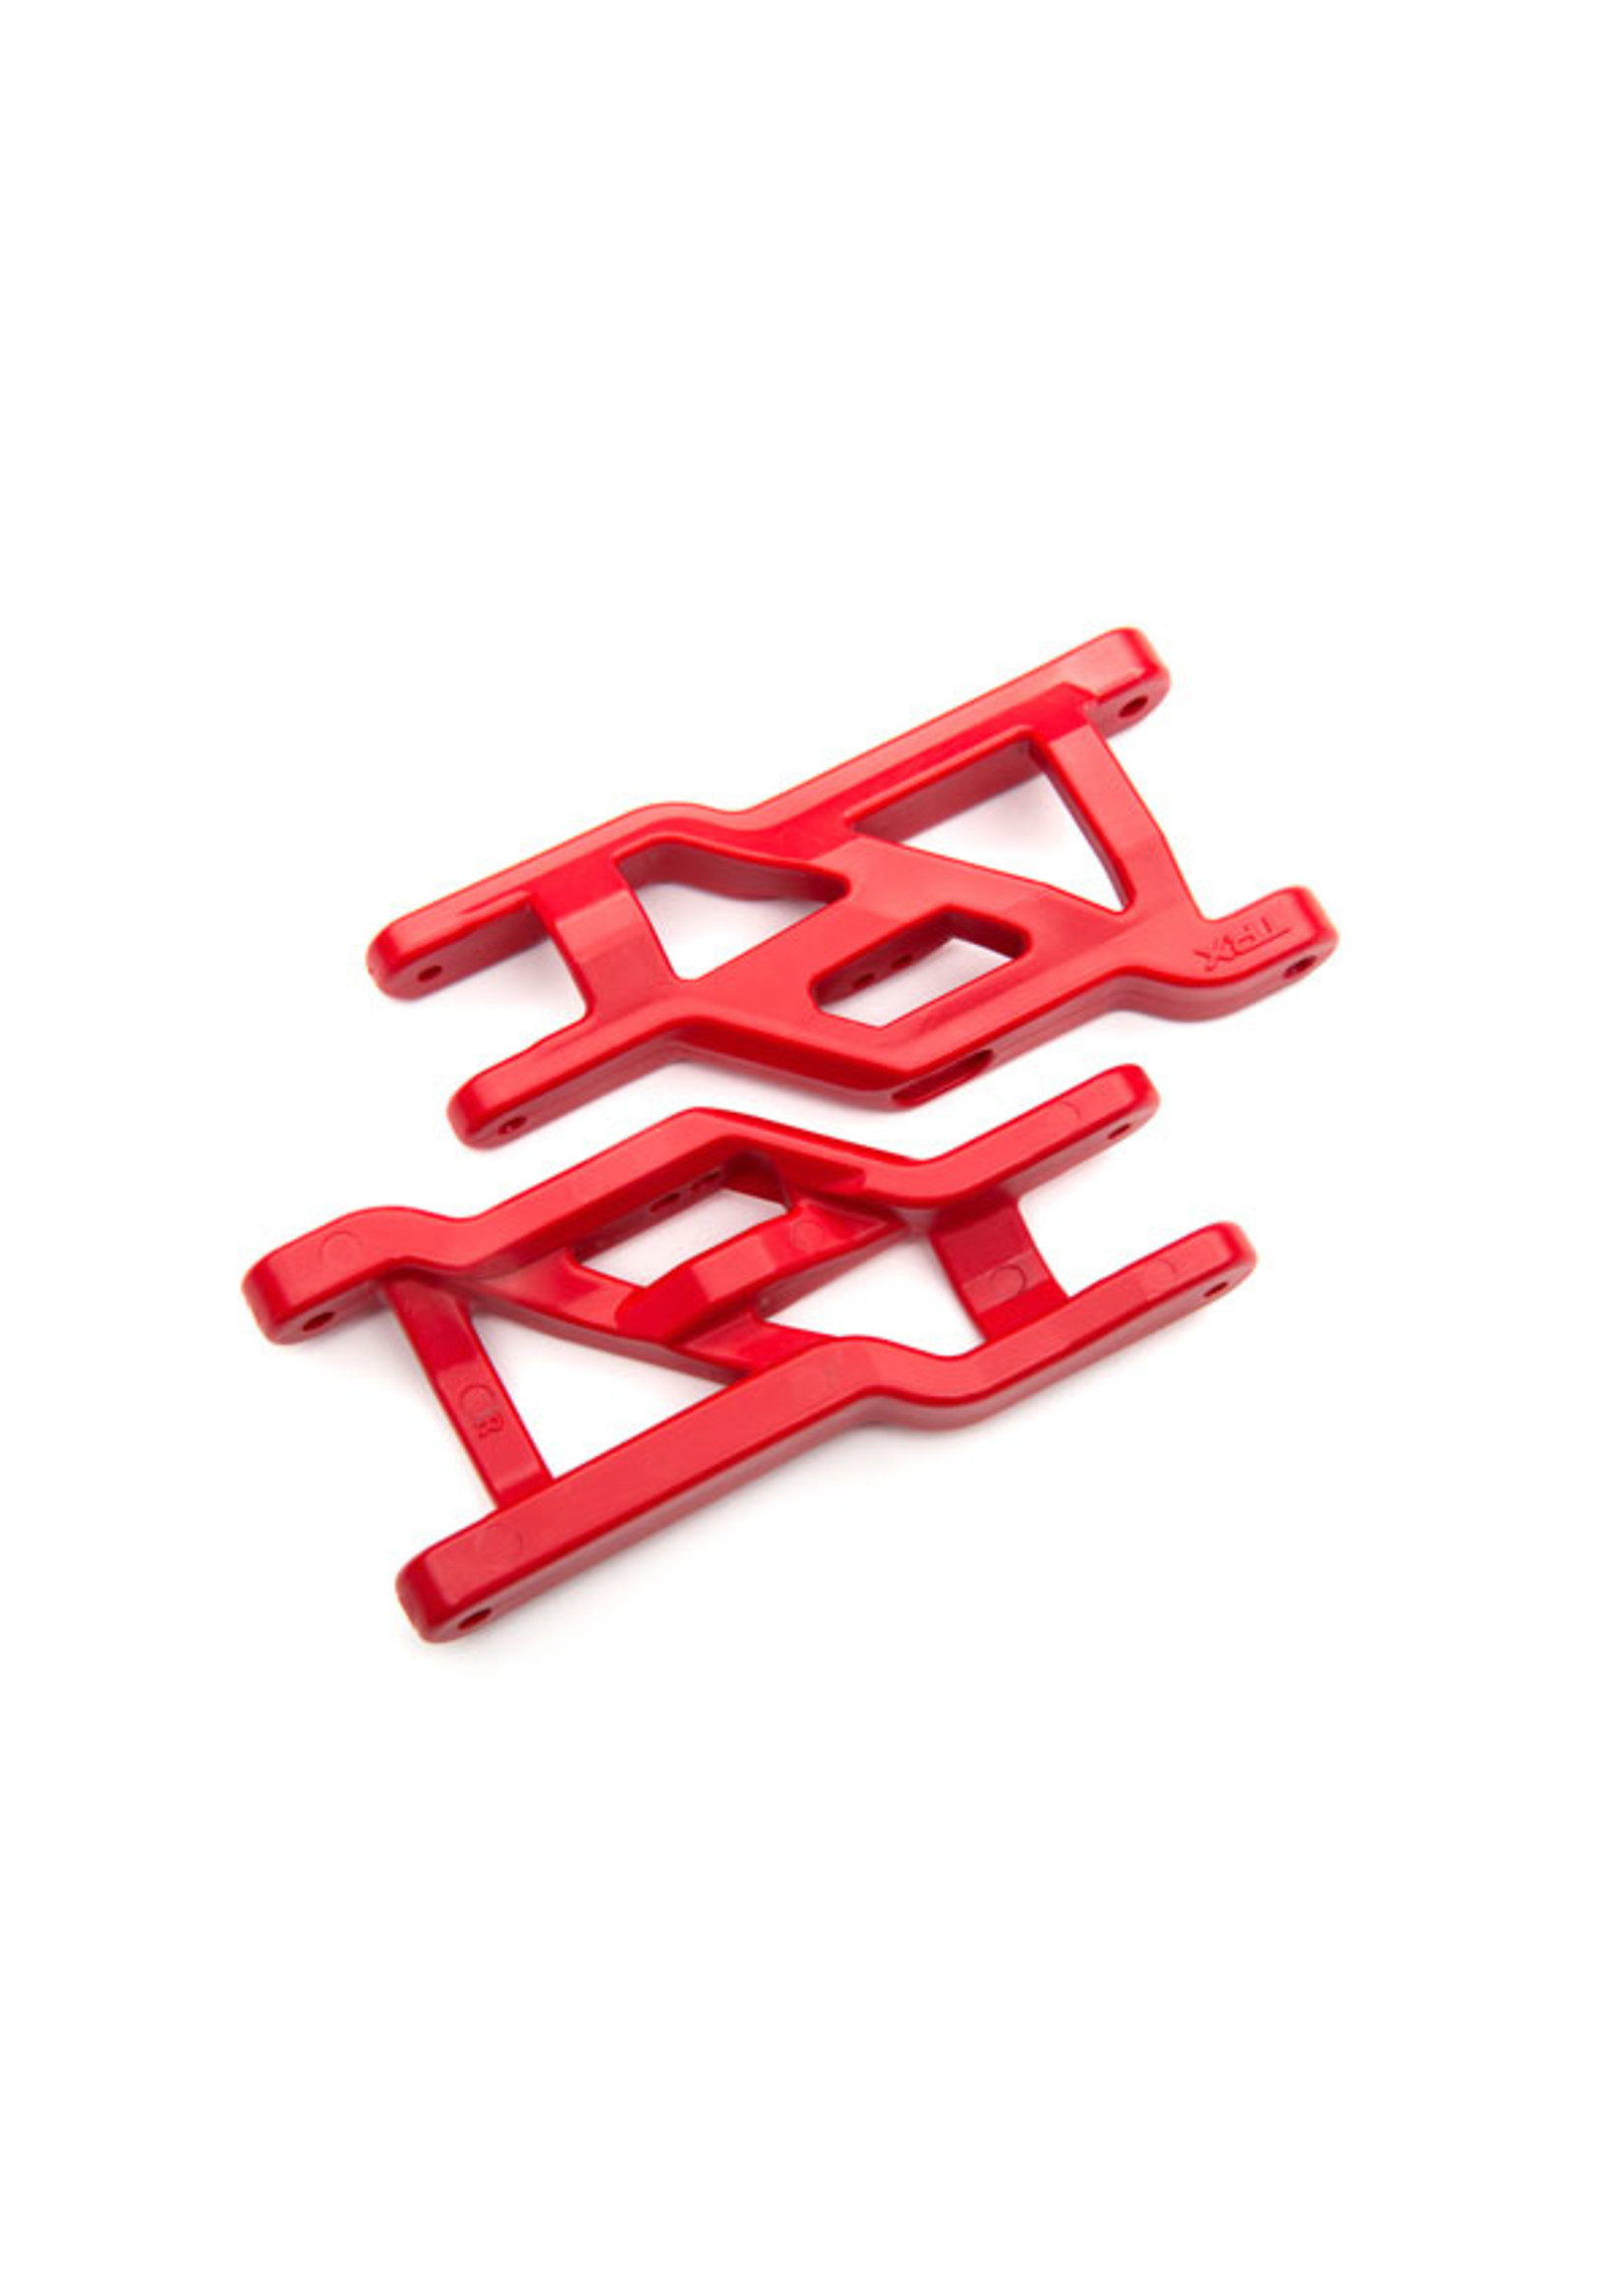 Traxxas 3631R - Heavy Duty Front Suspension Arms - Red